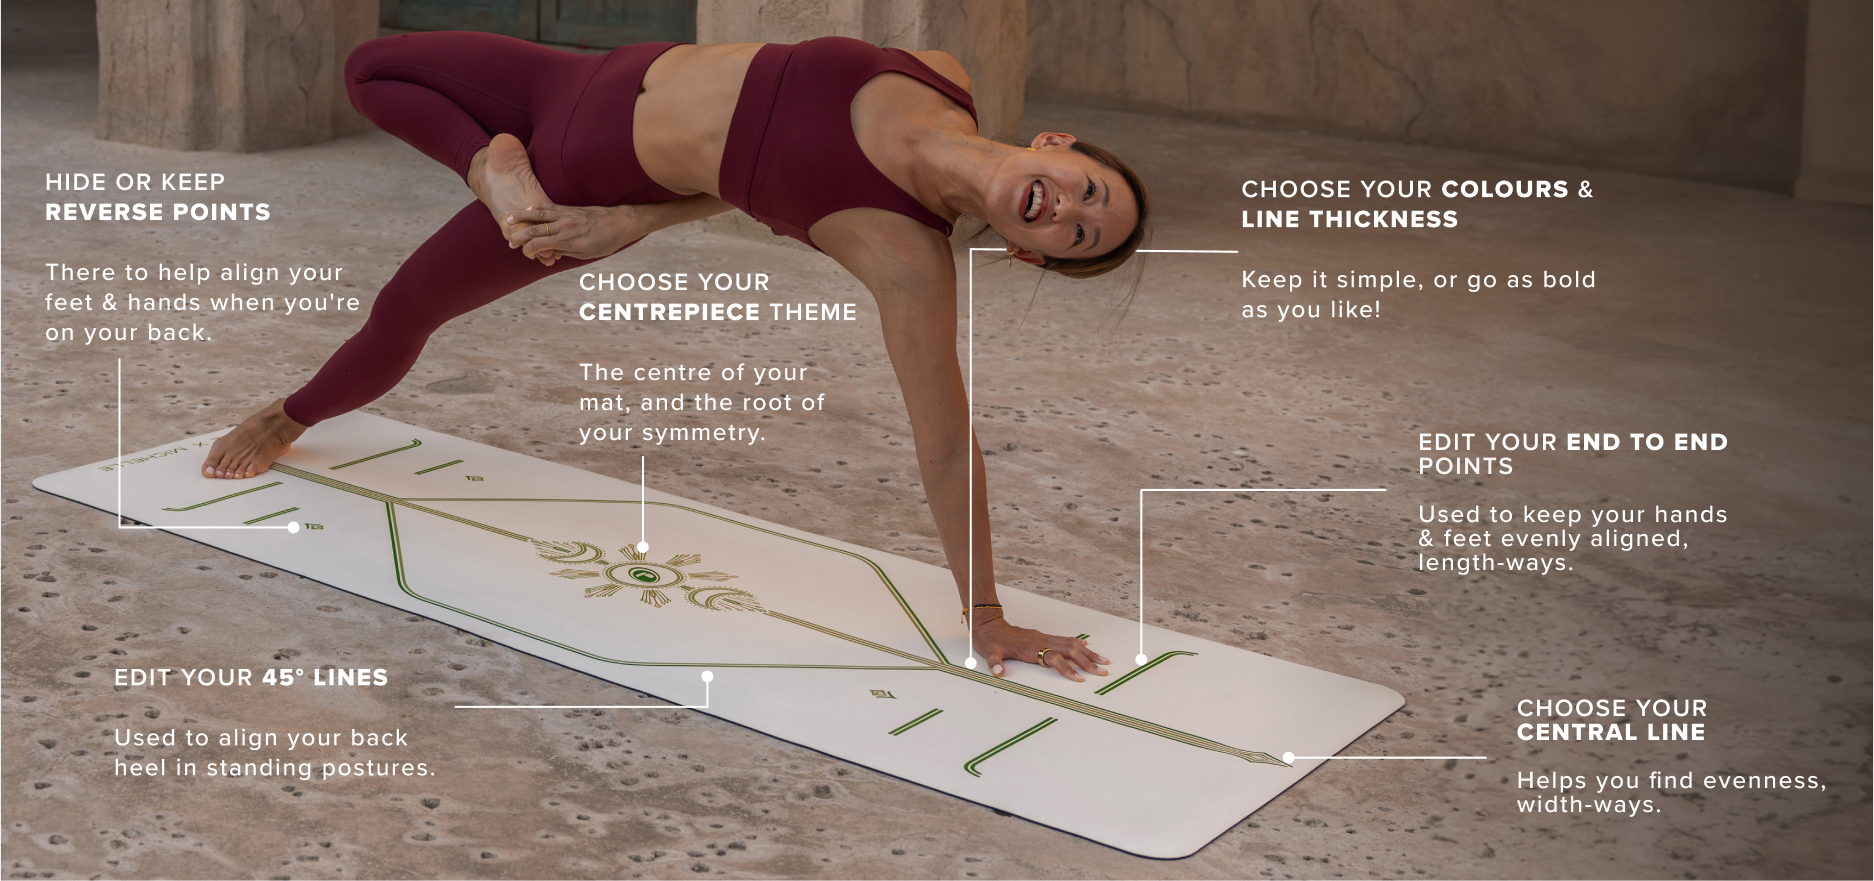 How To Choose The PERFECT Yoga Mat Thickness - yoga my old friend